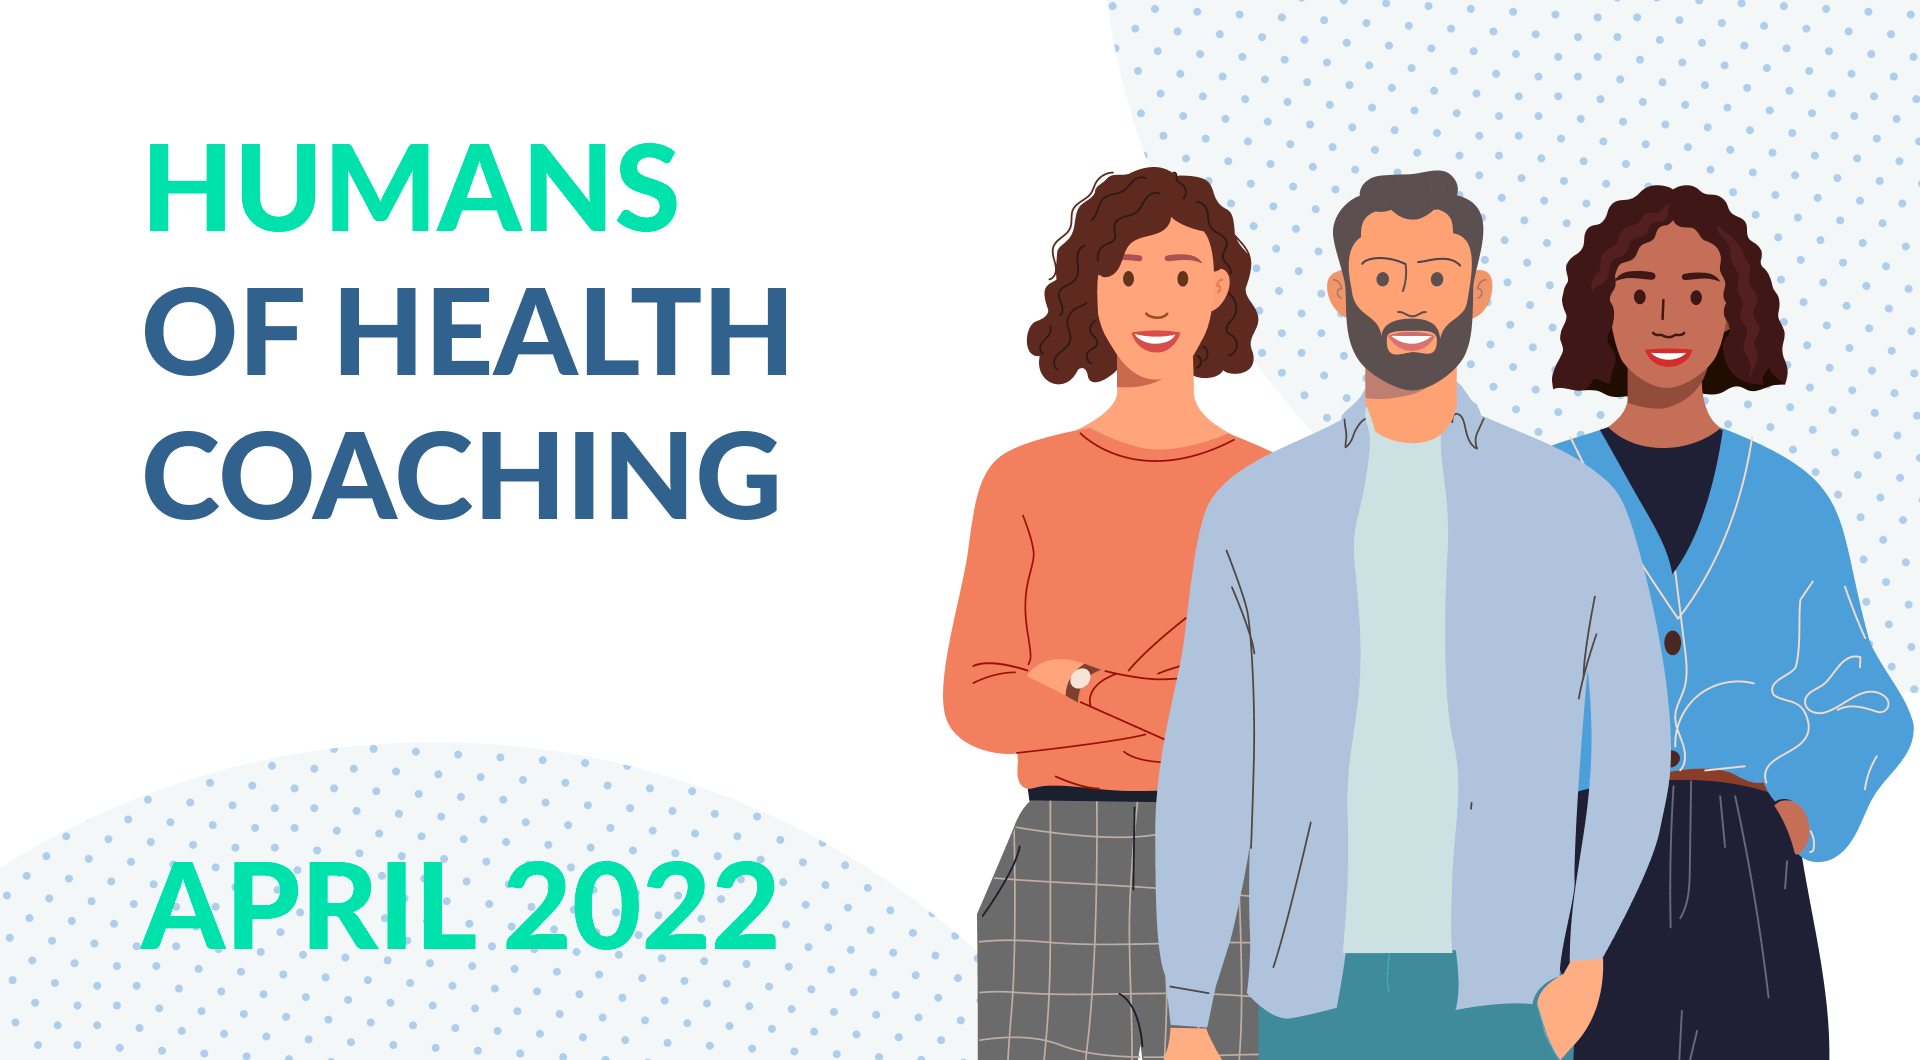 Humans of health coaching - April 2022